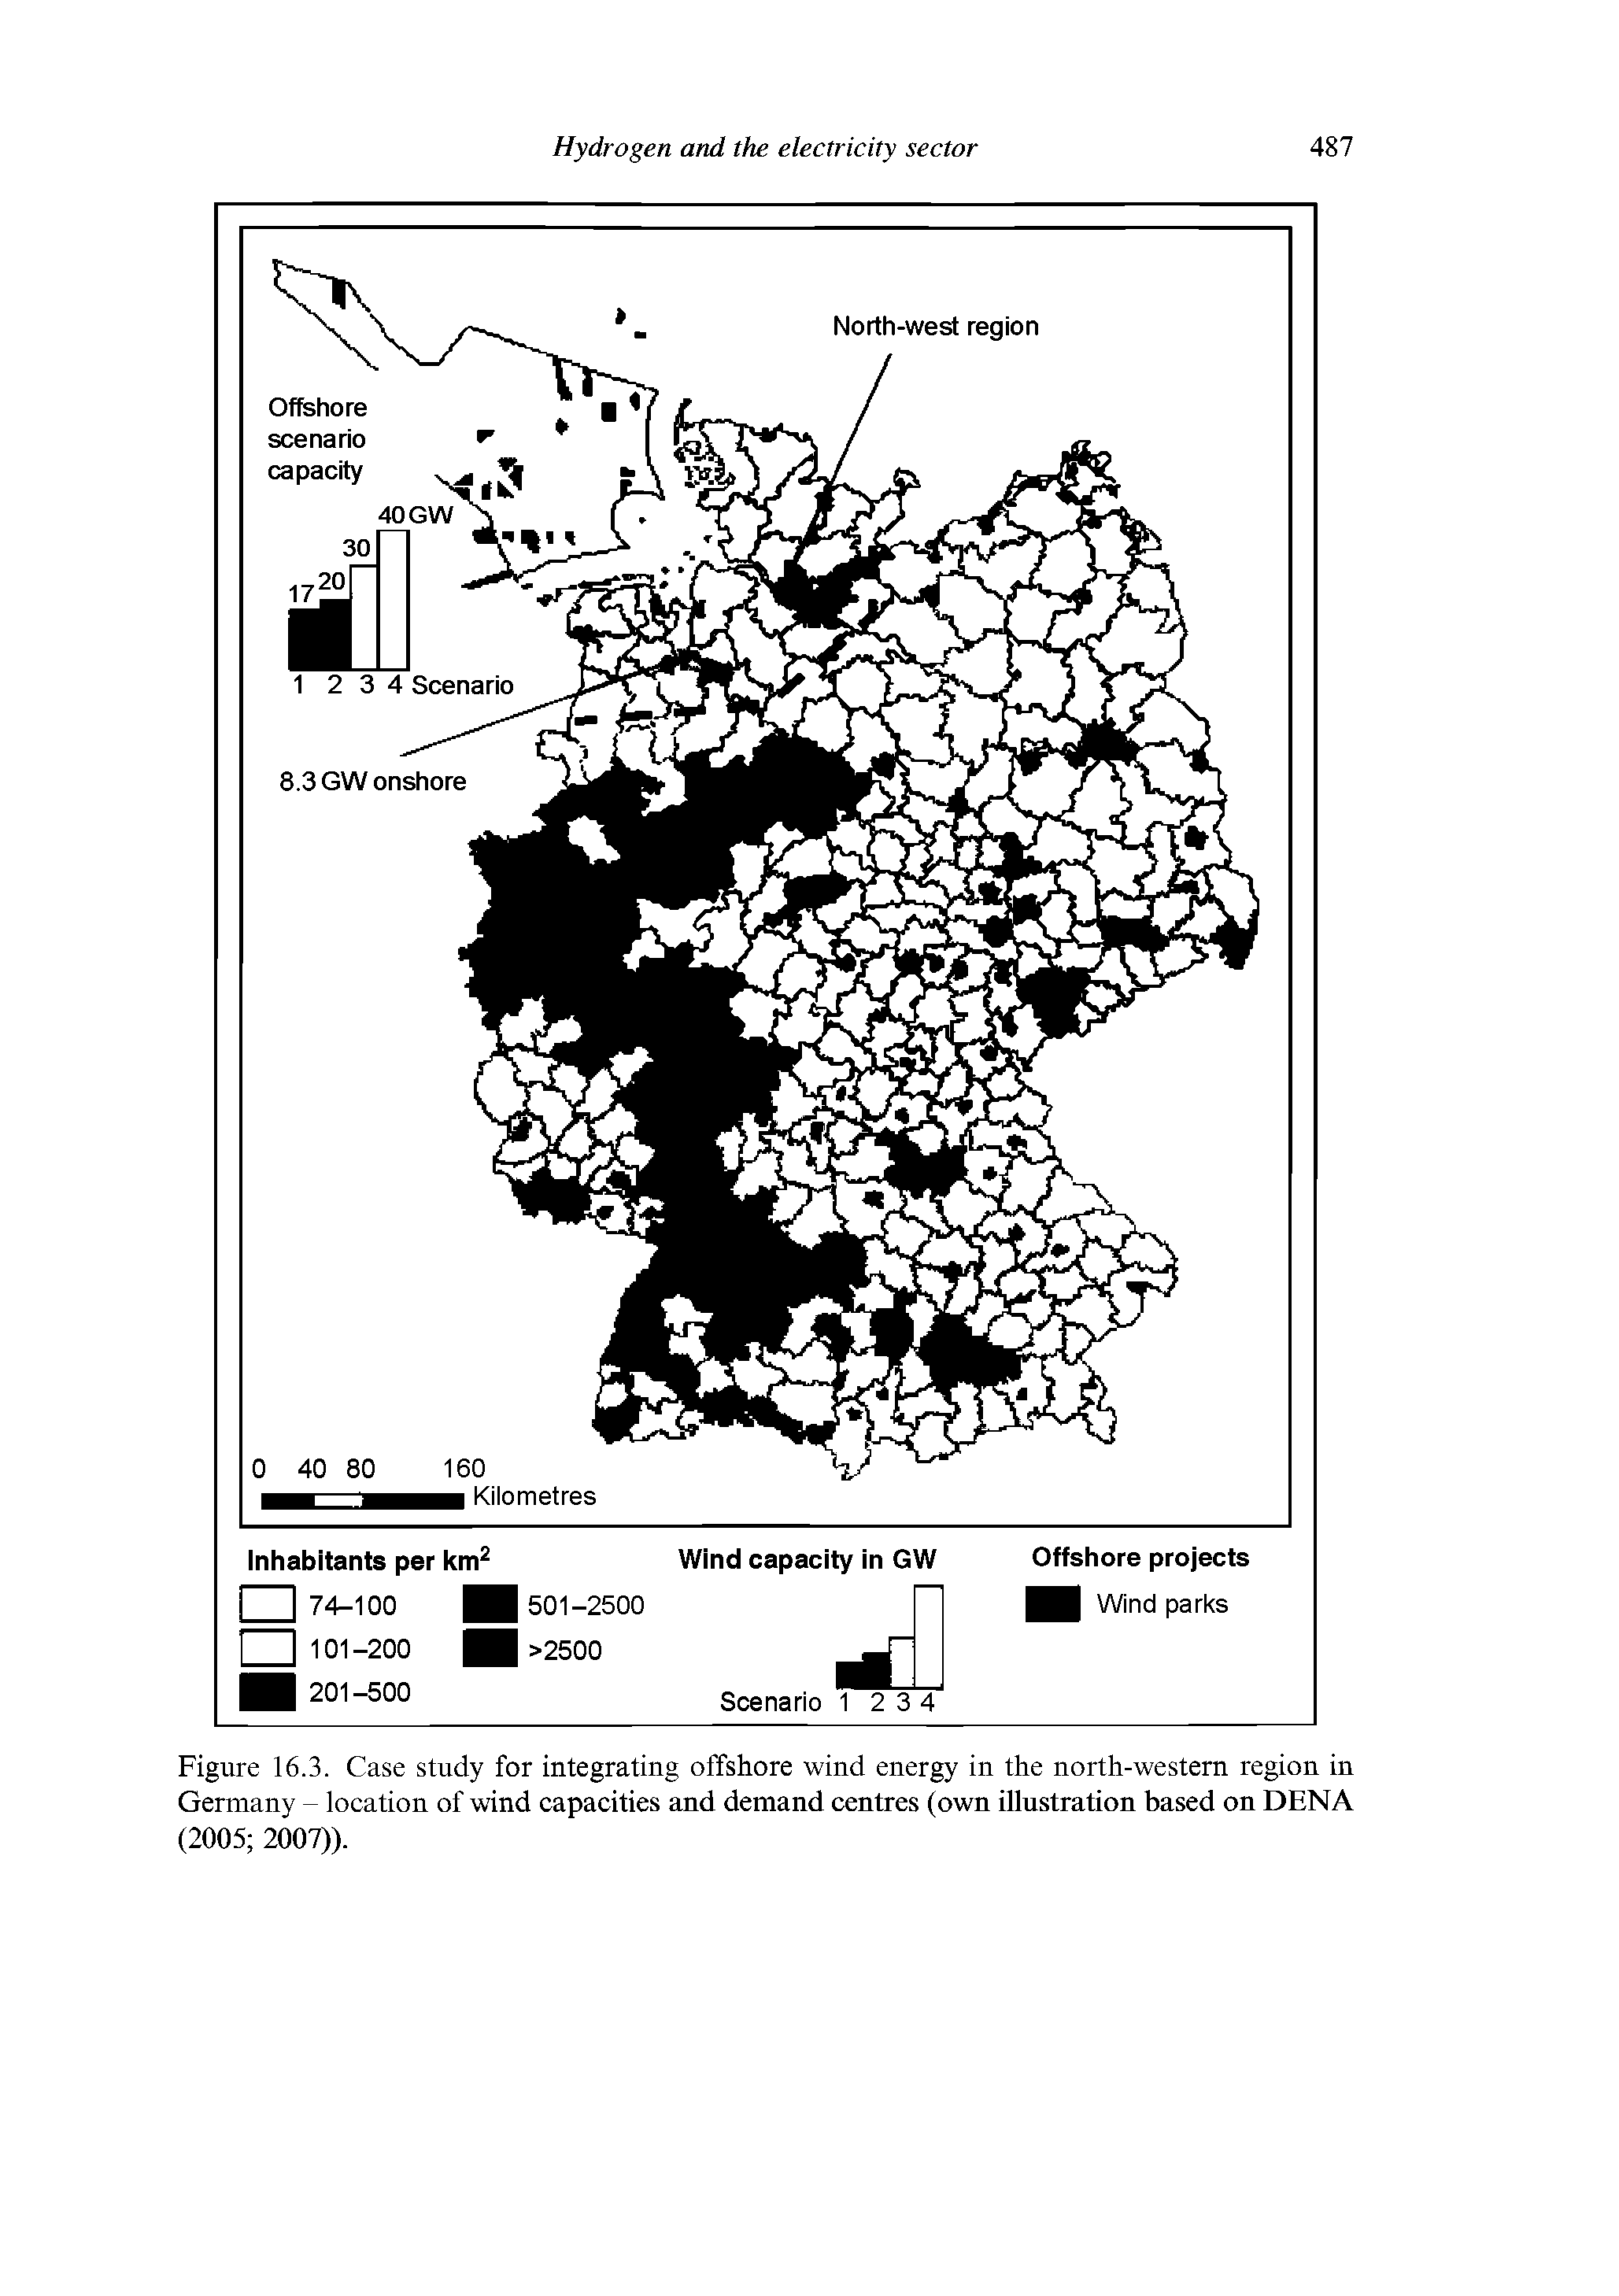 Figure 16.3. Case study for integrating offshore wind energy in the north-western region in Germany - location of wind capacities and demand centres (own illustration based on DENA (2005 2007)).